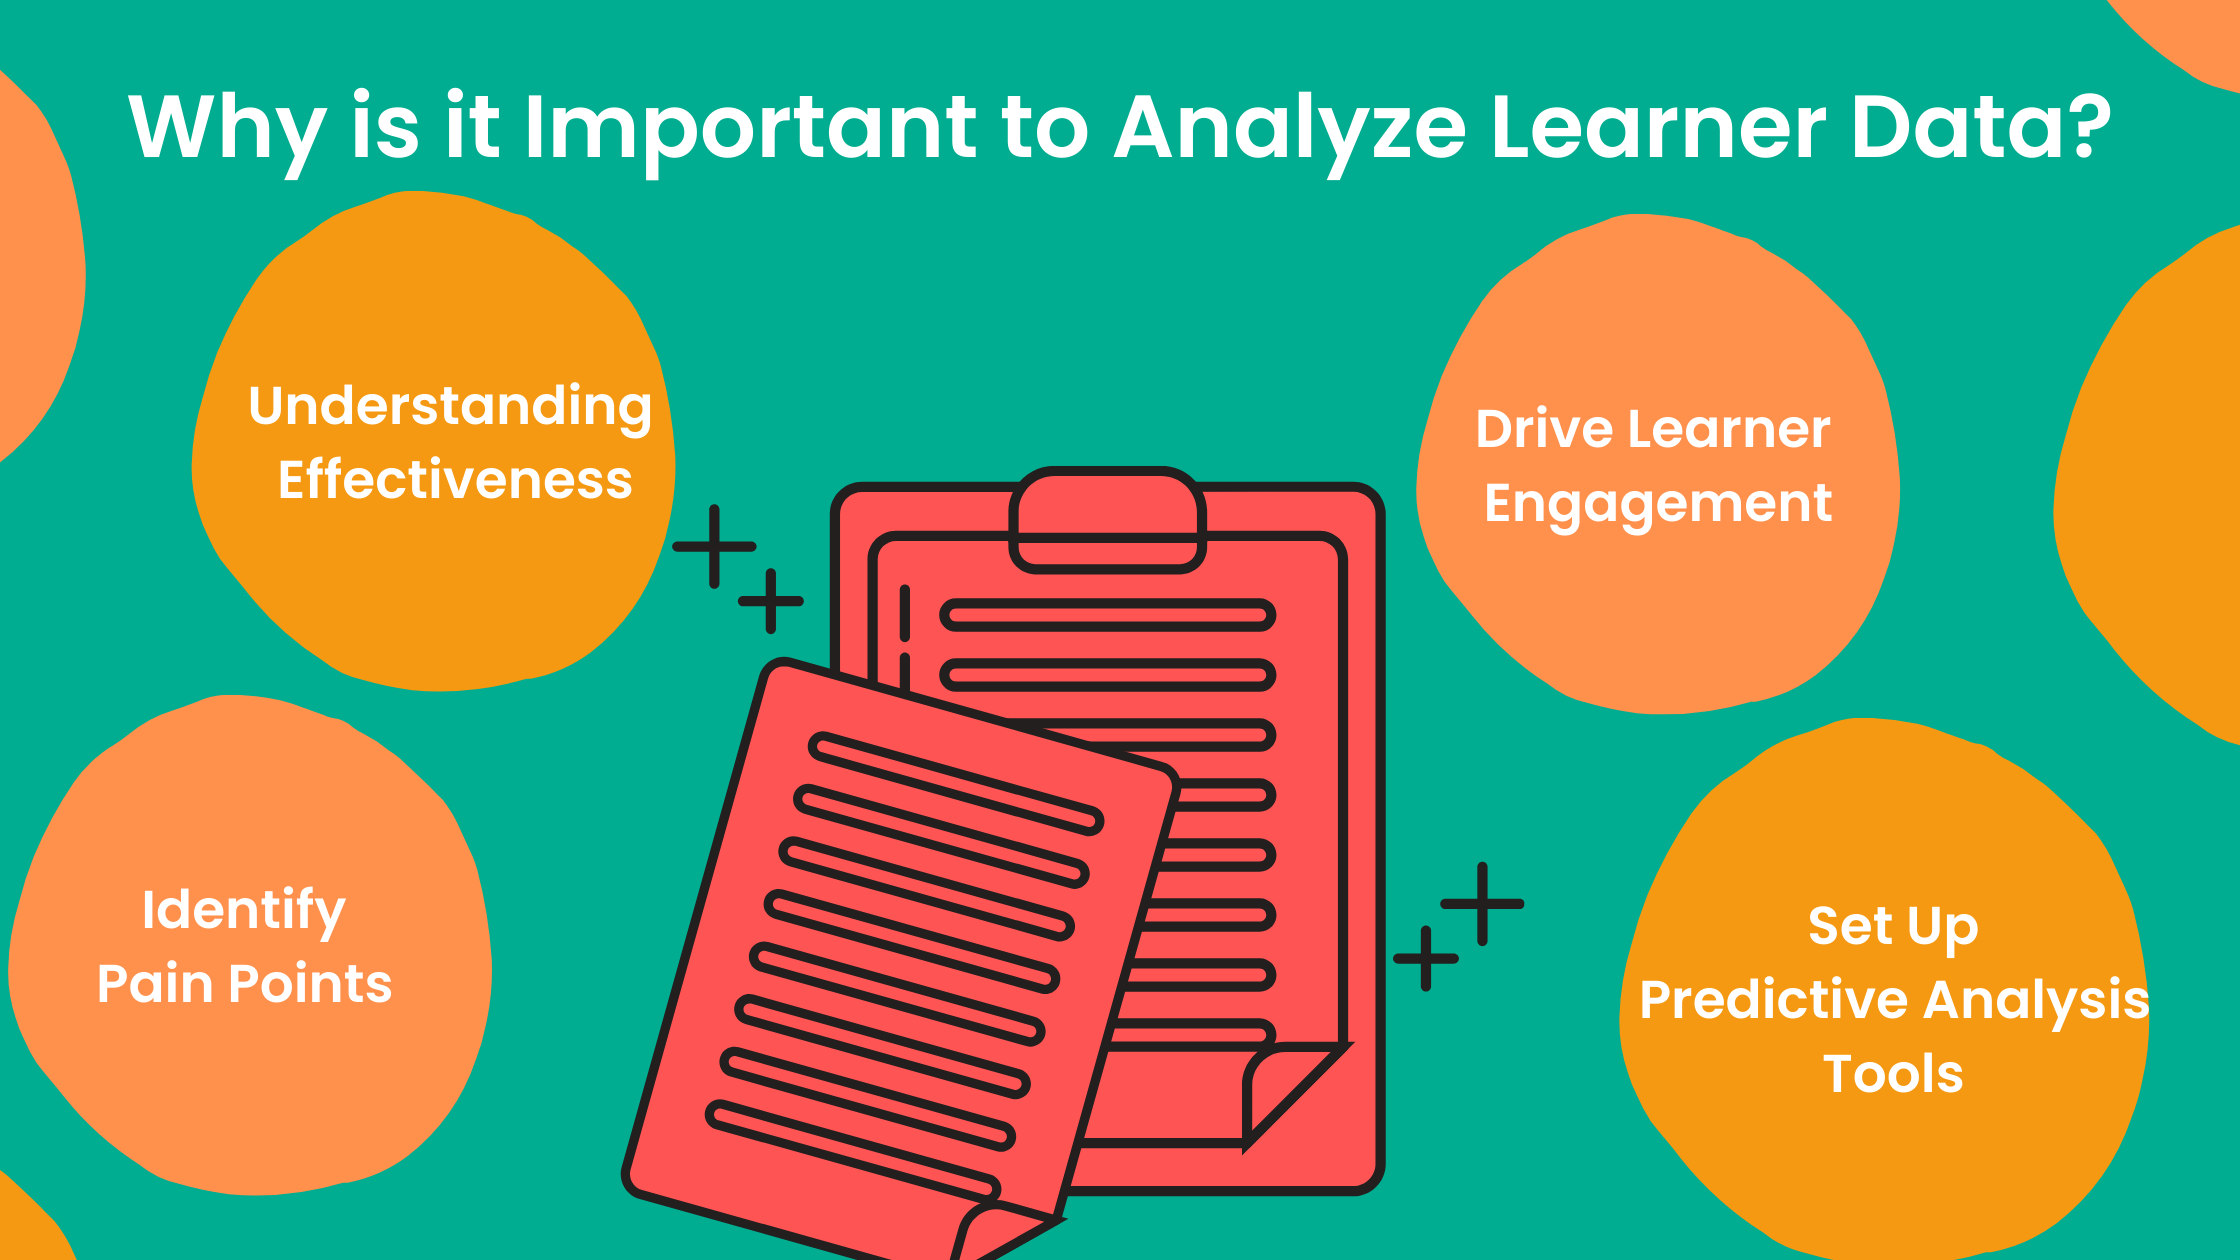 Why is it Important to Analyze Learner Data in eLearning?